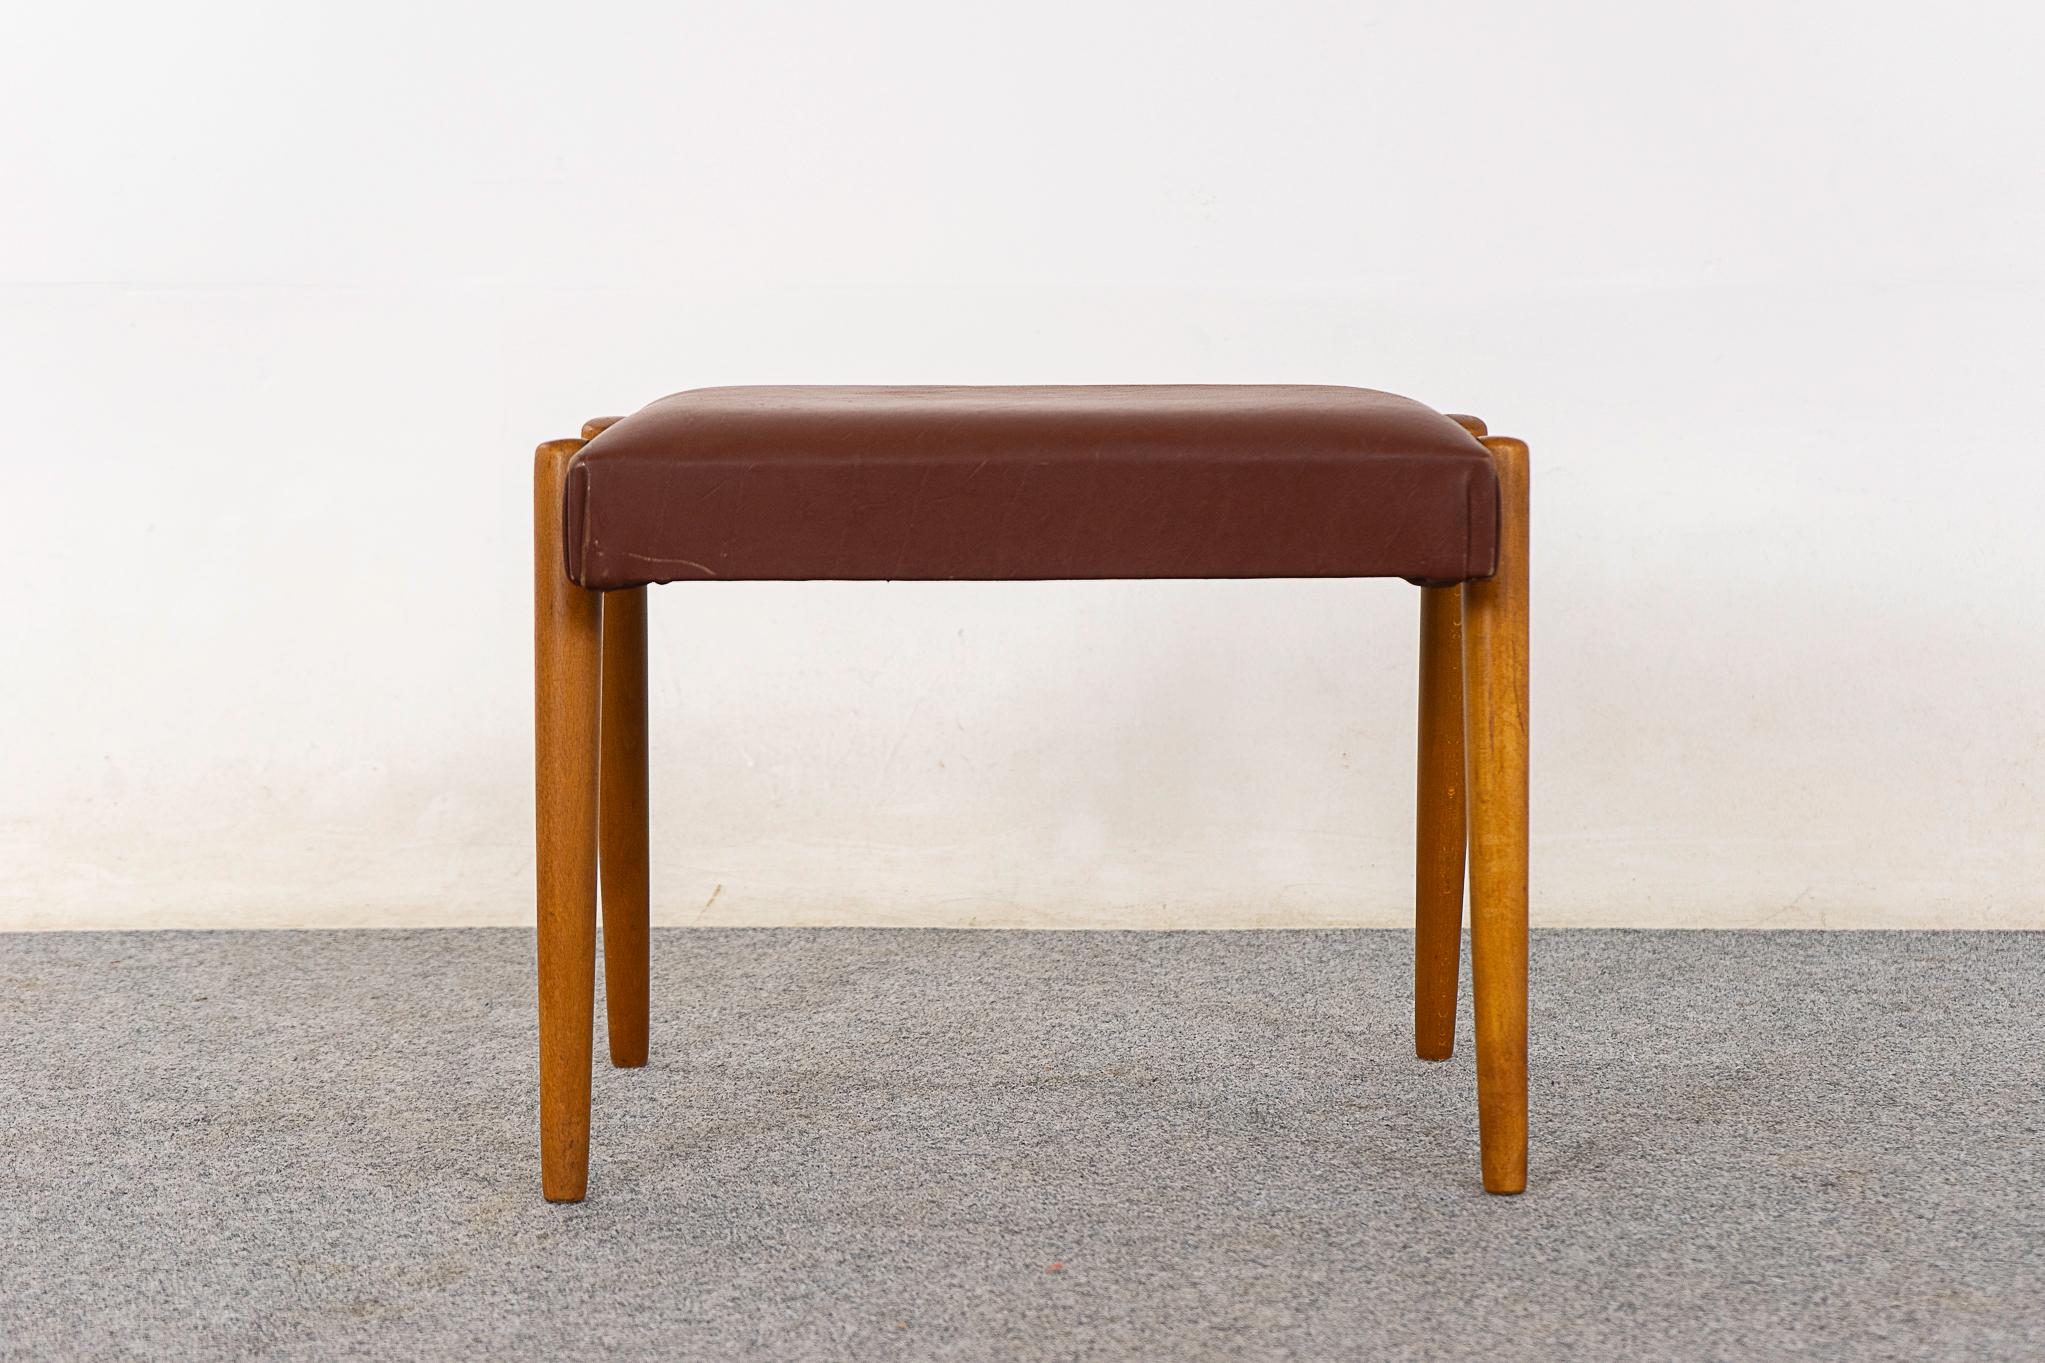 Beech footstool, circa 1960's. Unique splayed legs & original upholstery with minor wear.